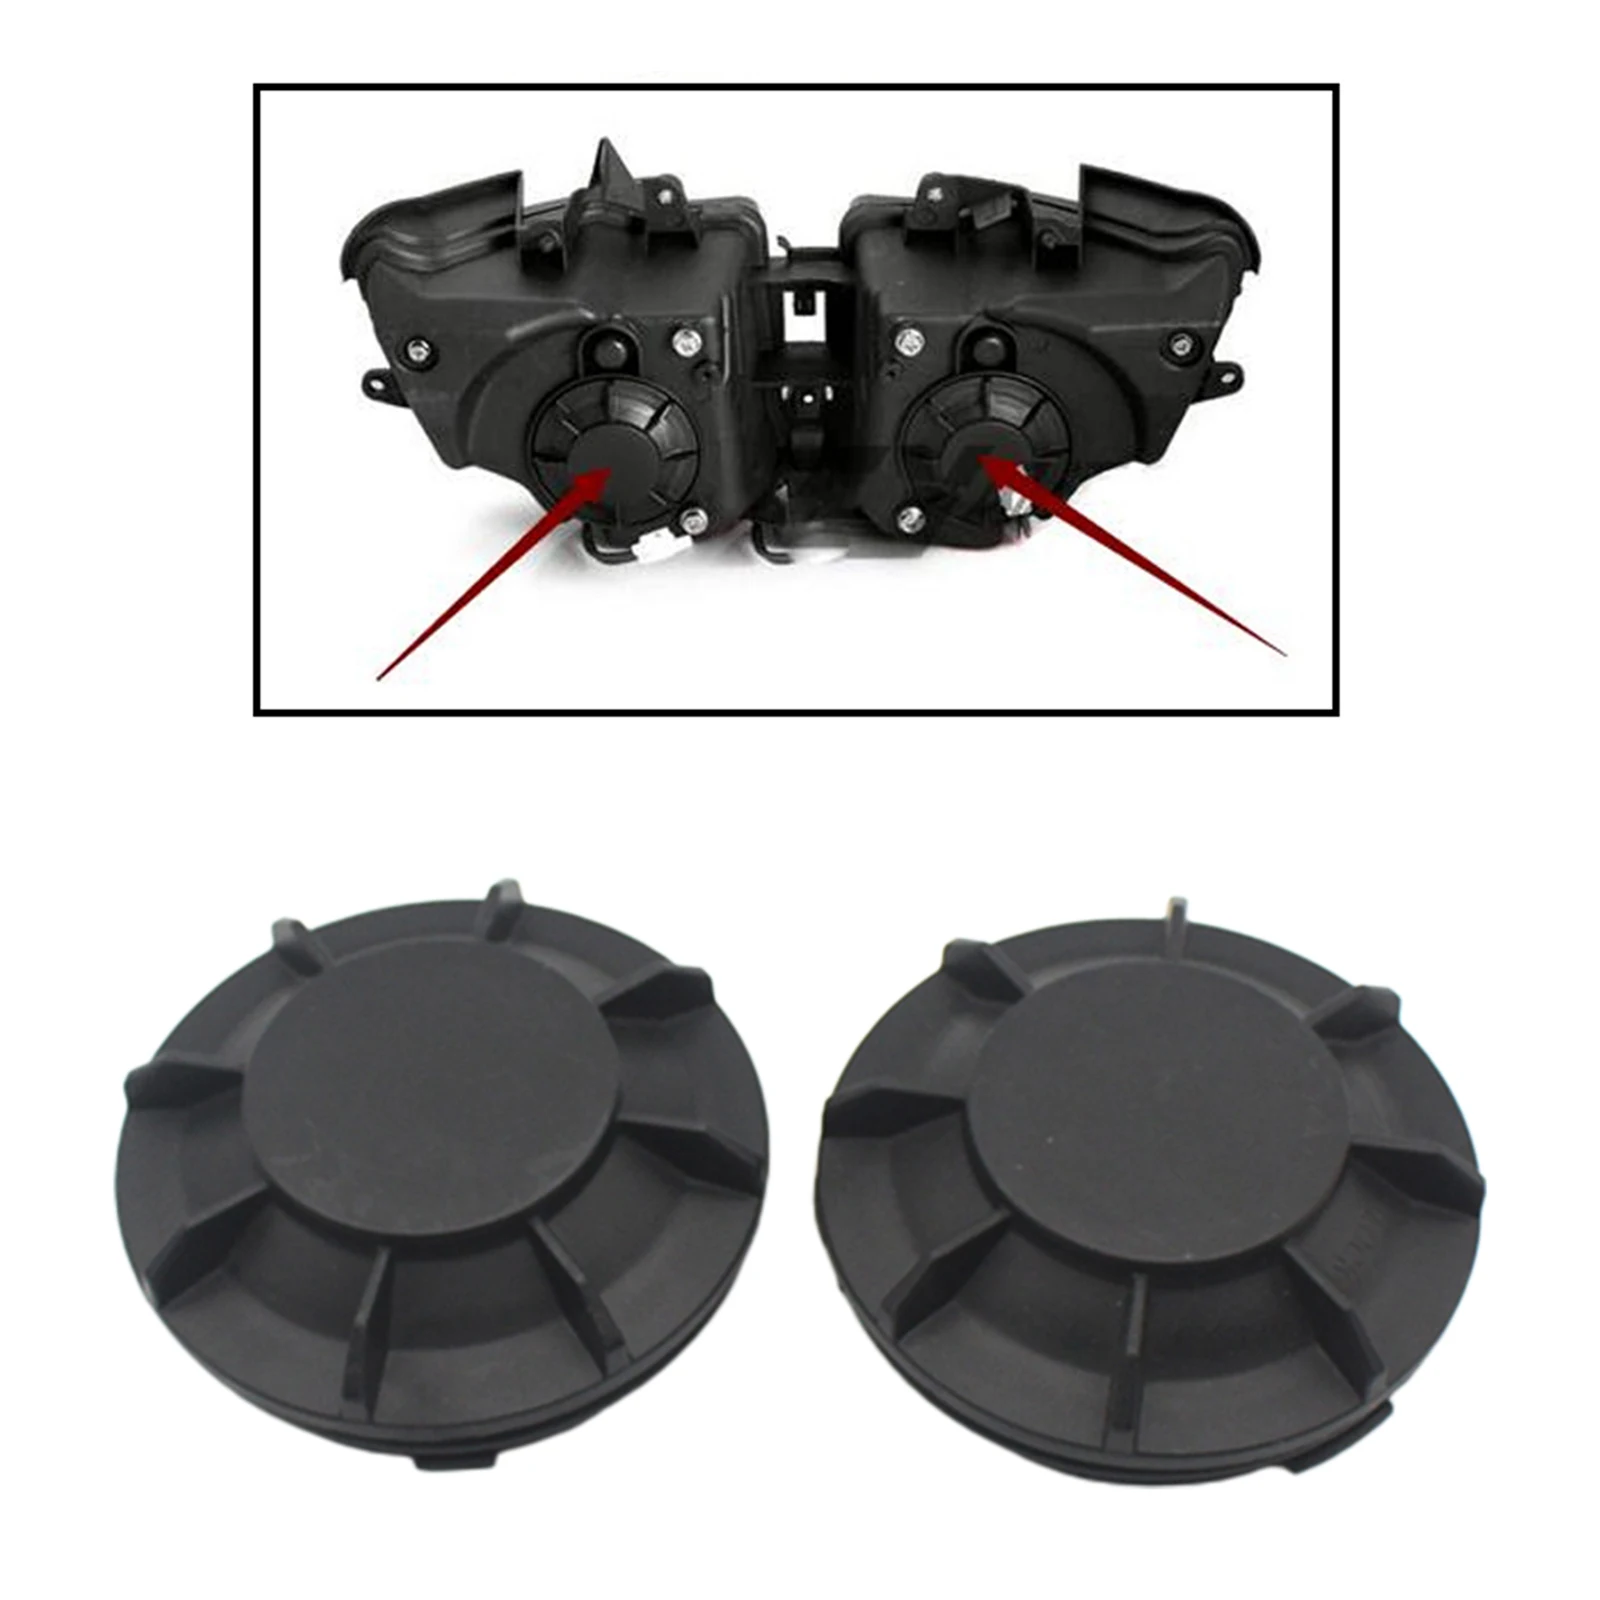 Headlight Tail Rear Cap Scooter Part Cover Dustproof For Yamaha YZF R6 R1